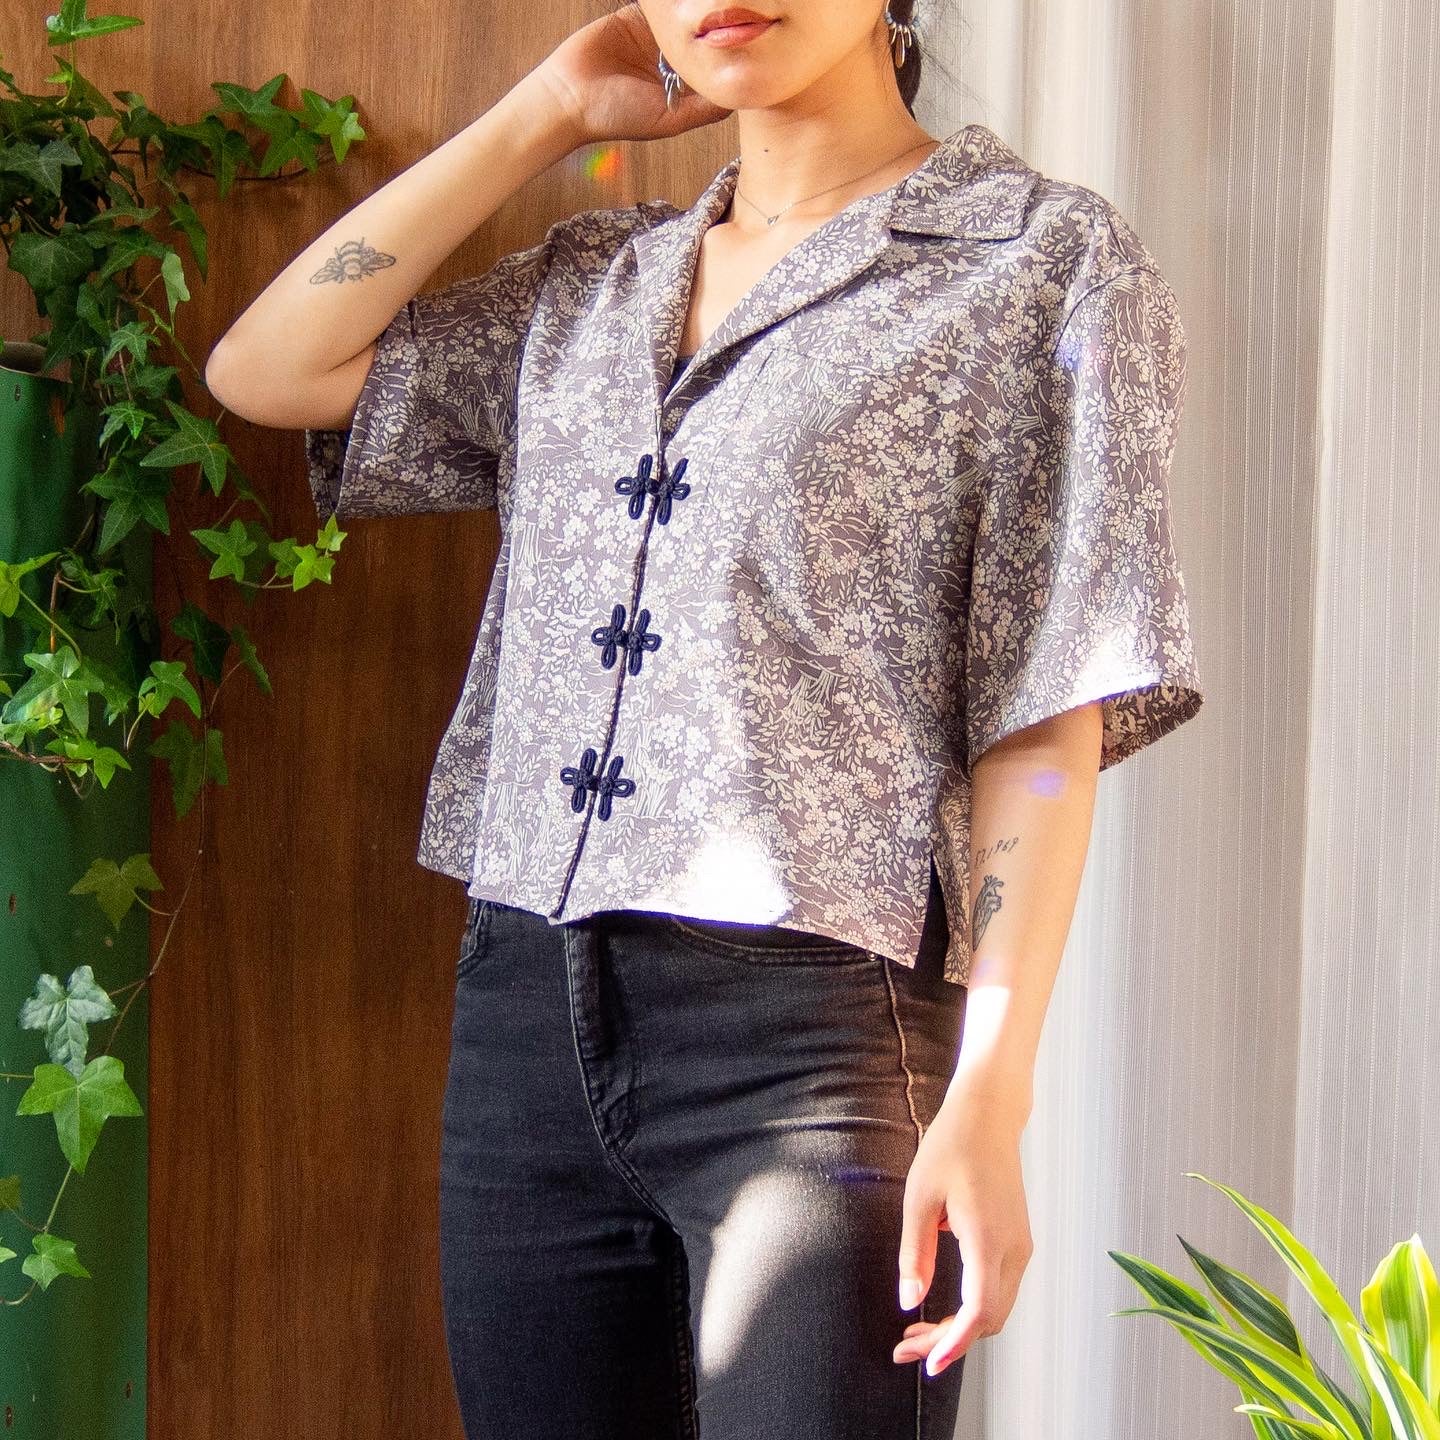 Silk shirt with frog closures made from kimono.